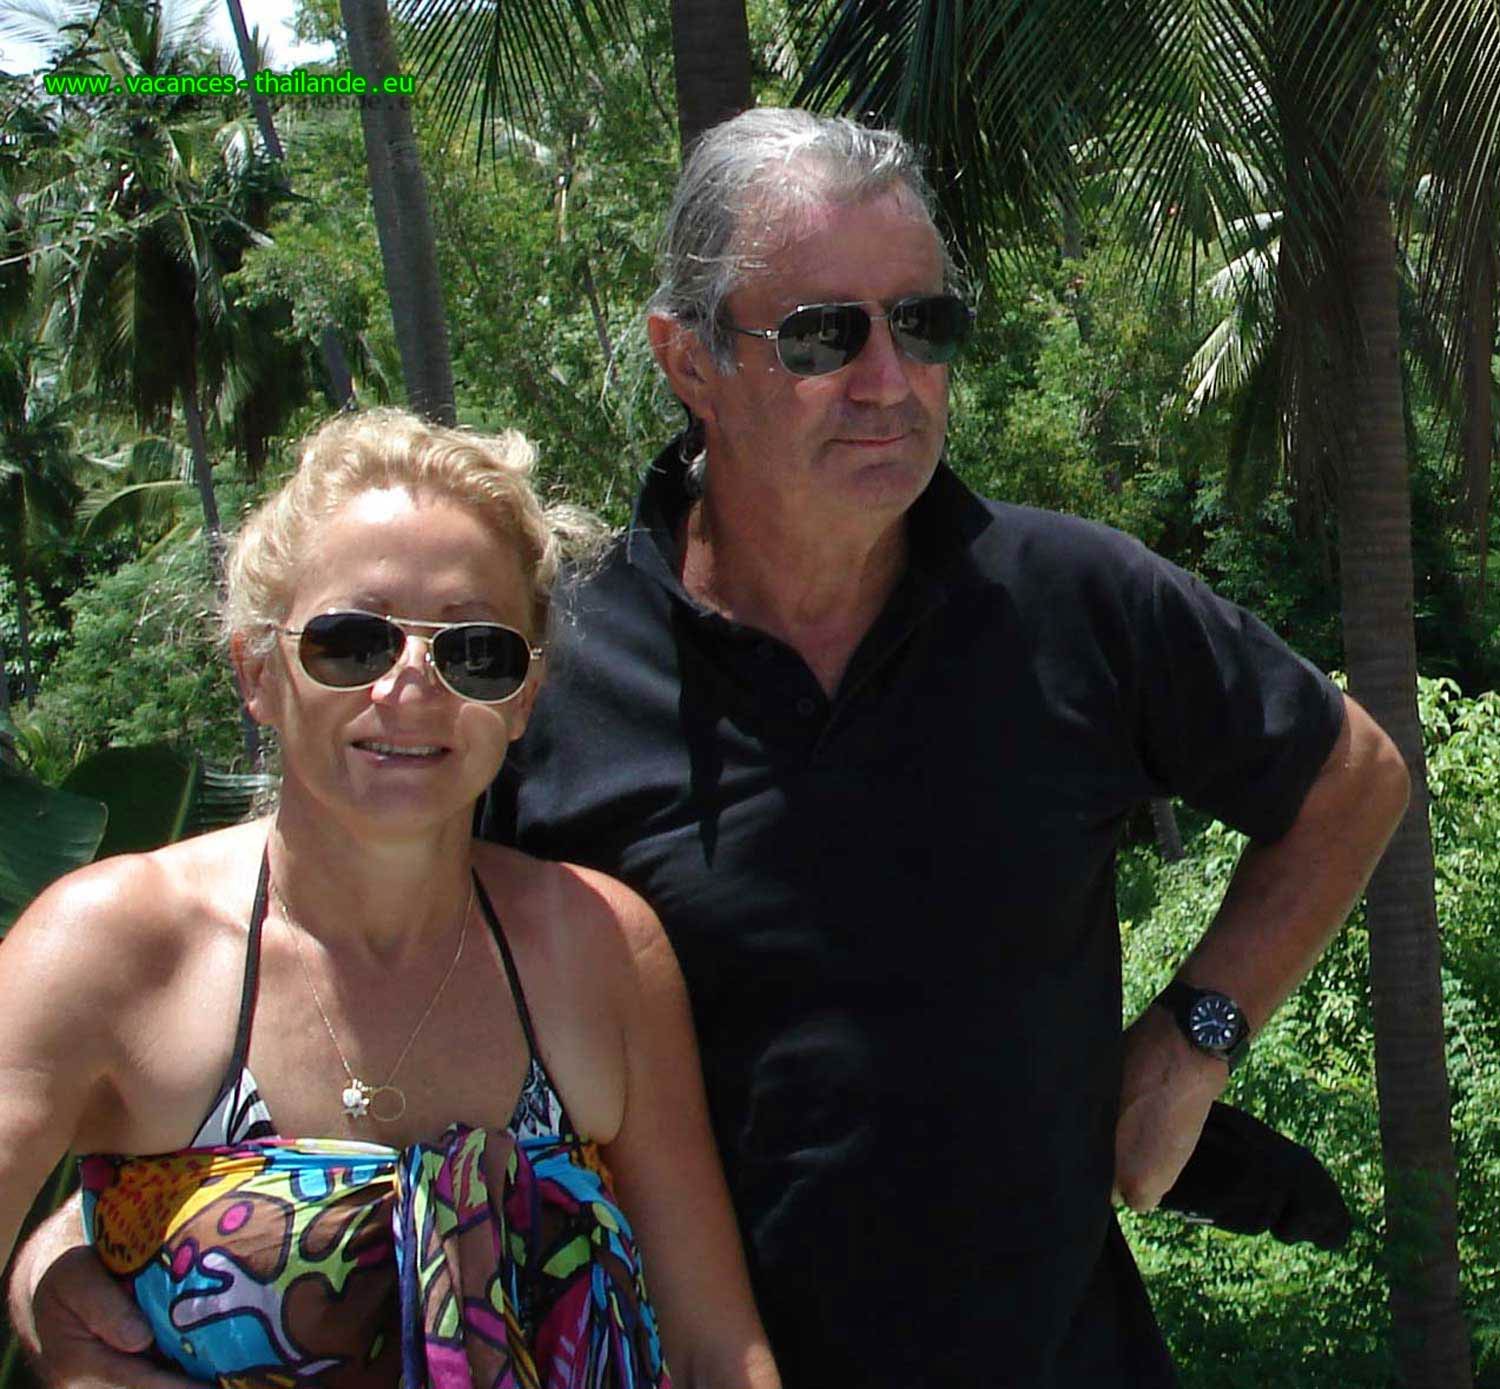 Team, Mary and Patrick welcome you to the island of Koh Samui in Thailand to help you enjoy your holiday